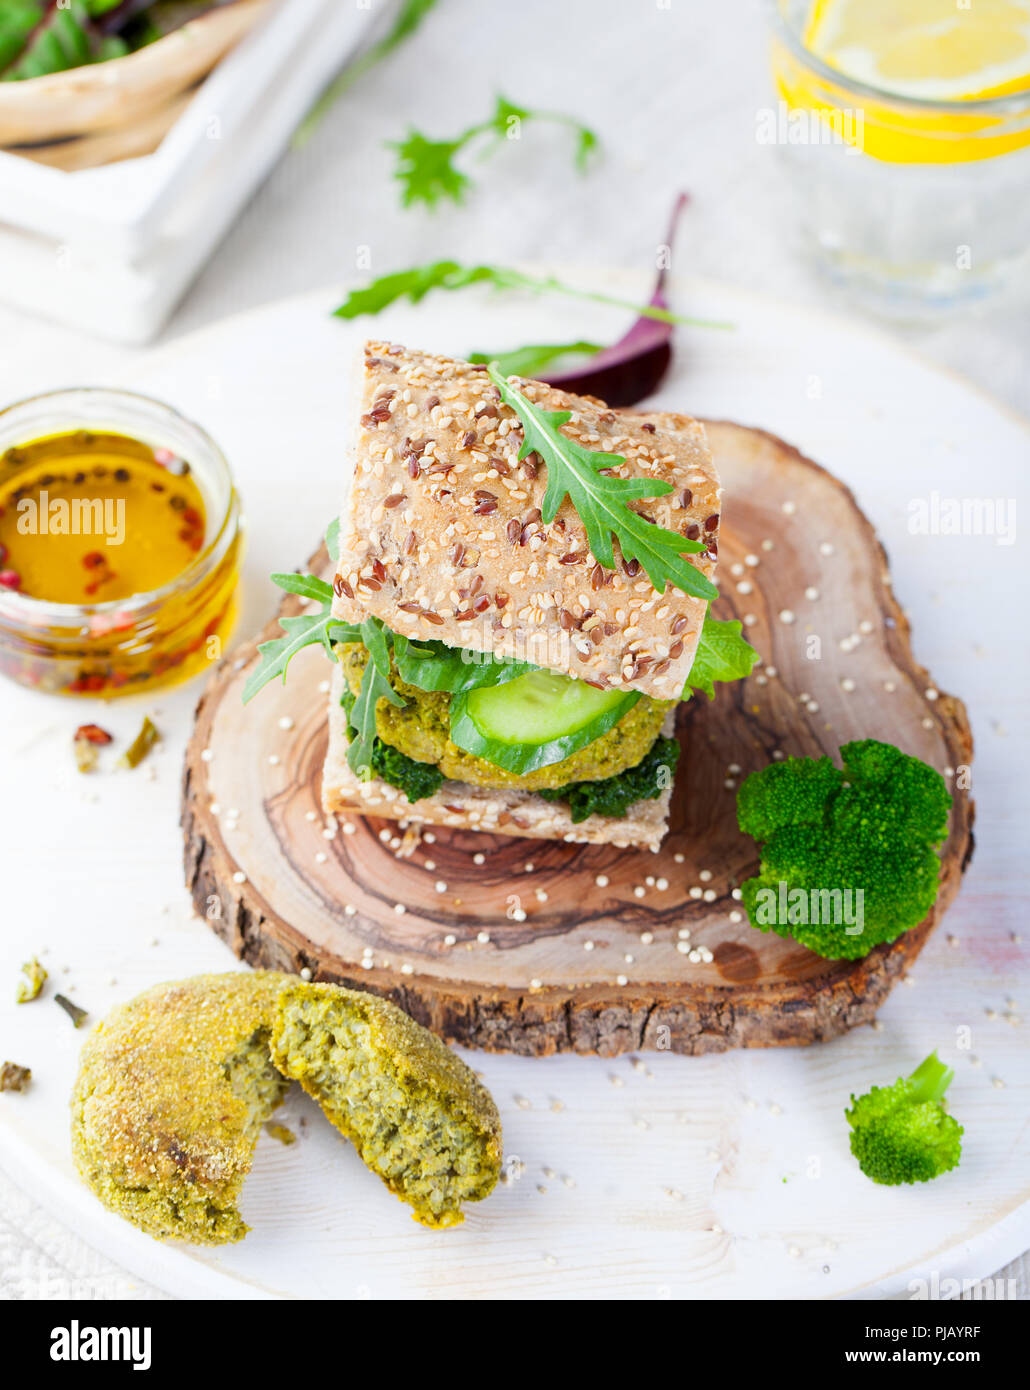 Healthy vegan burger with broccoli and spinach patty on a cutting wooden board. Stock Photo